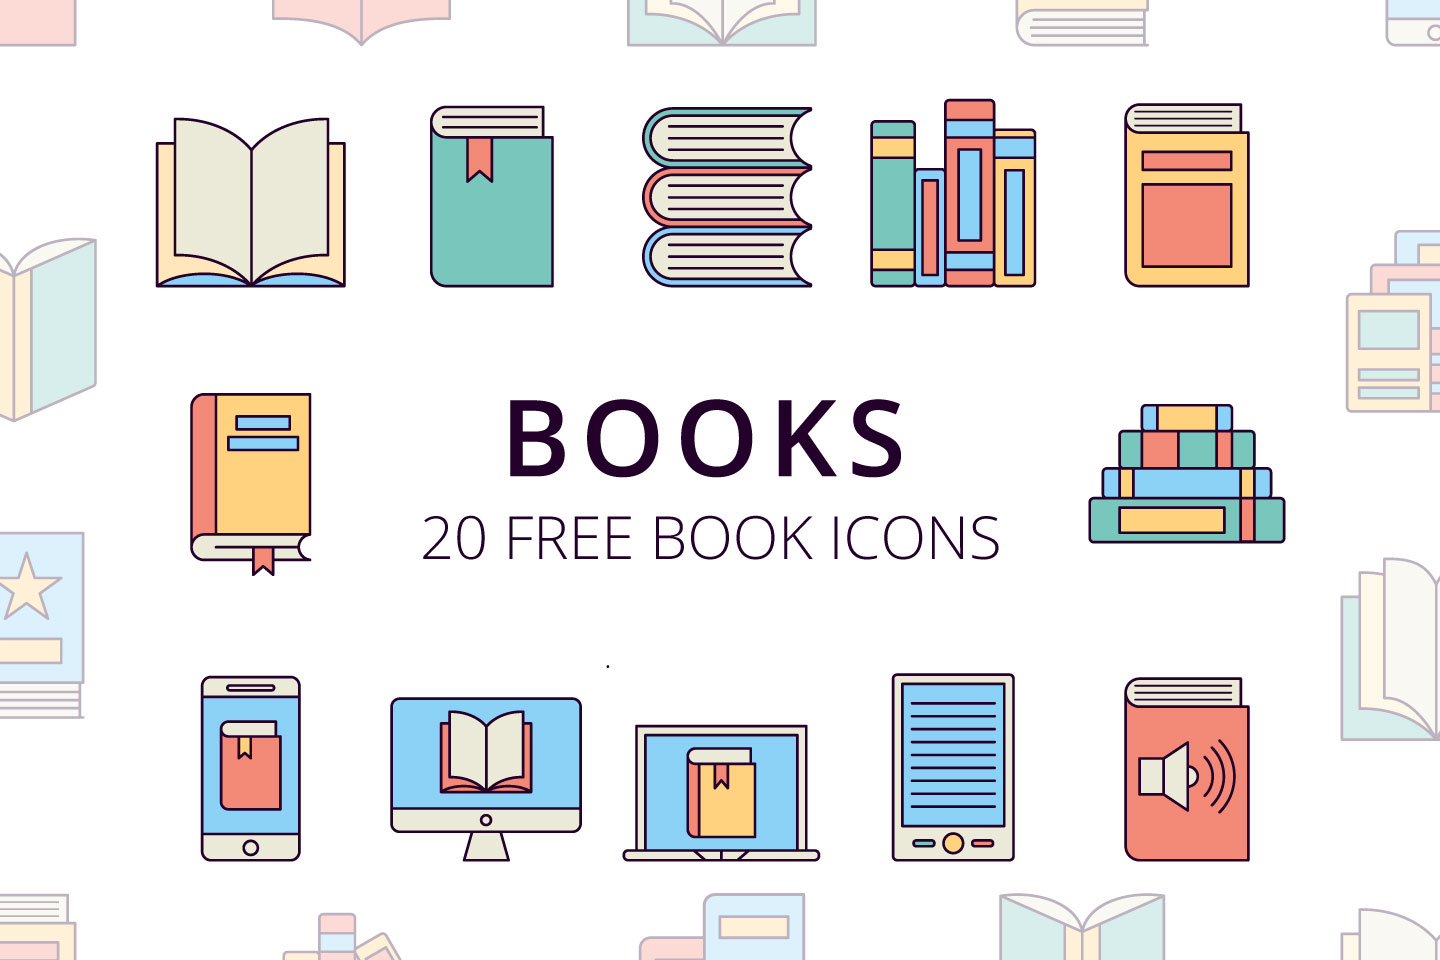 Download Book Vector Free Icons Set - GraphicSurf.com